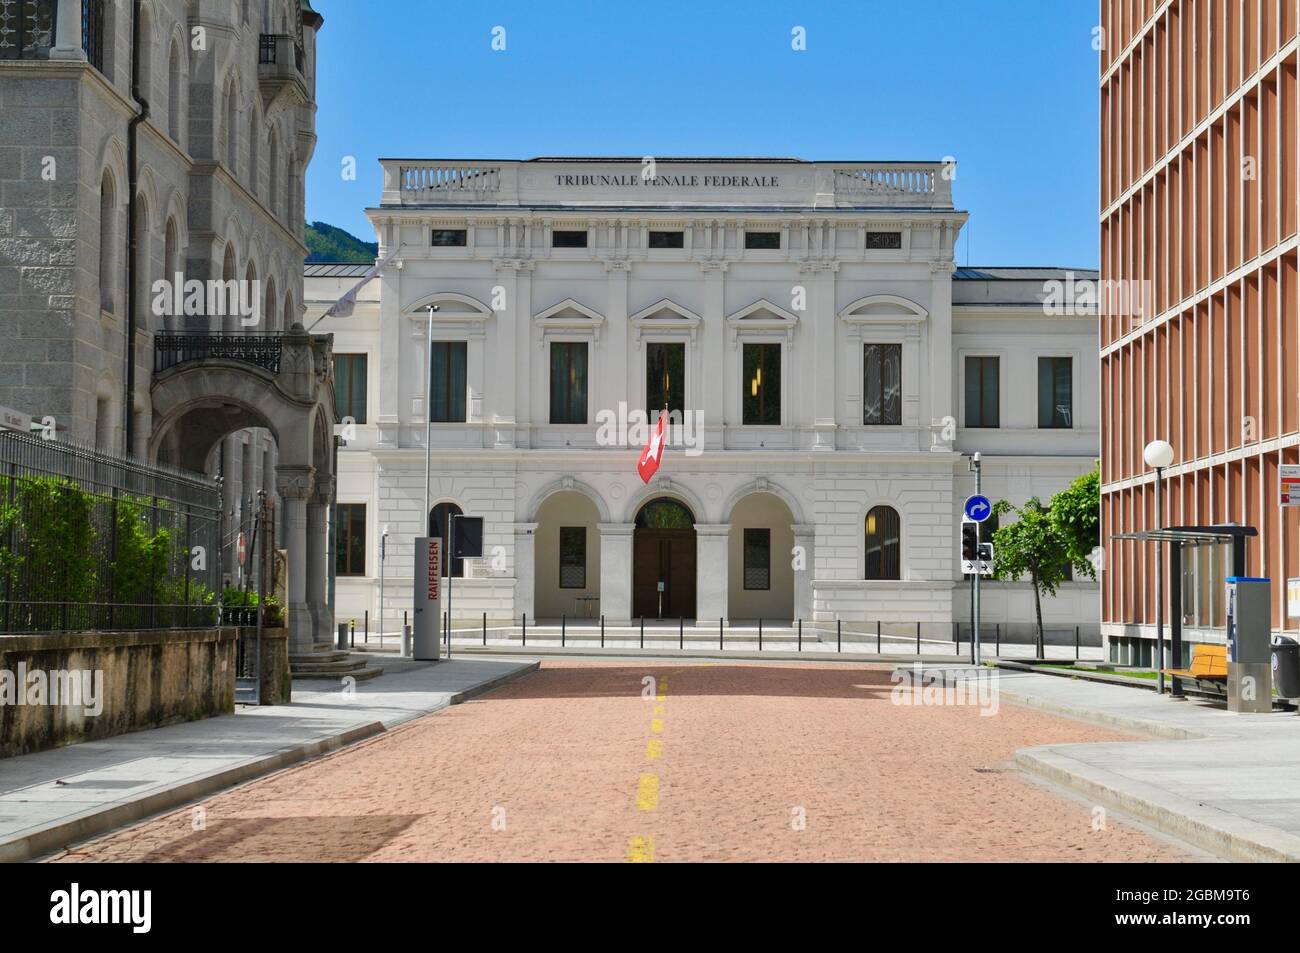 Bellinzona, Ticino, Switzerland - 17th May 2021 : View of the Federal Criminal Court building located in Bellinzona, Switzerland on a sunny day Stock Photo